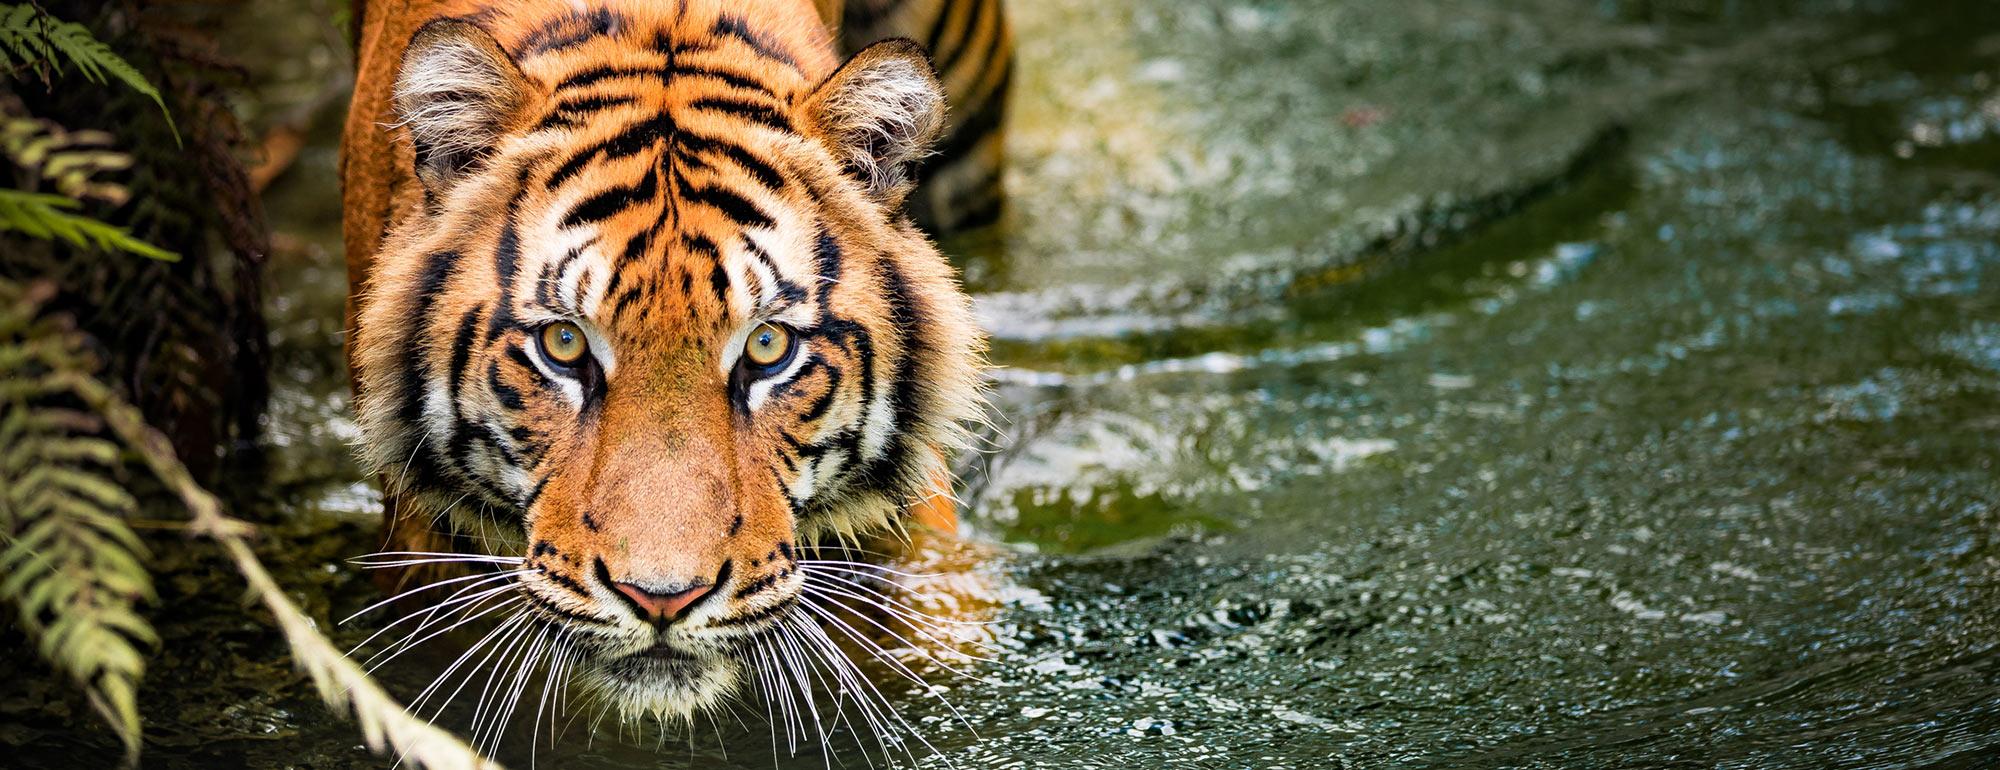 A tiger wades through a jungle river and peers up at the camera